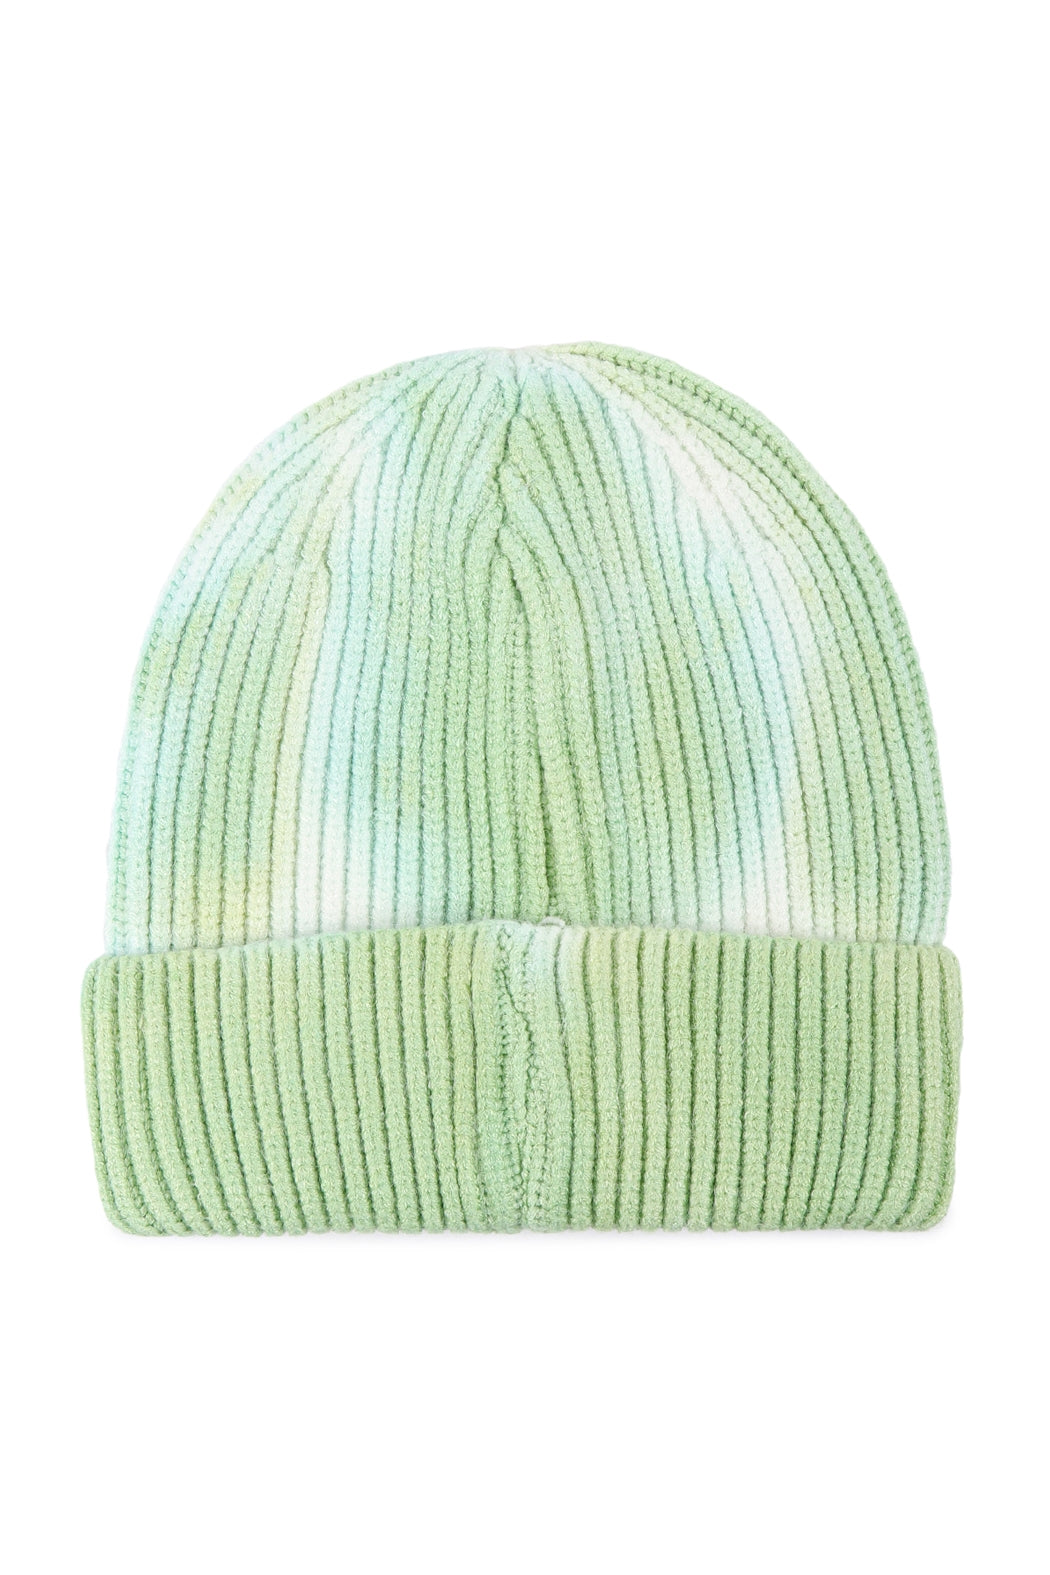 TIE DYE KNITTED BEANIE (NOW $2.50 ONLY!)